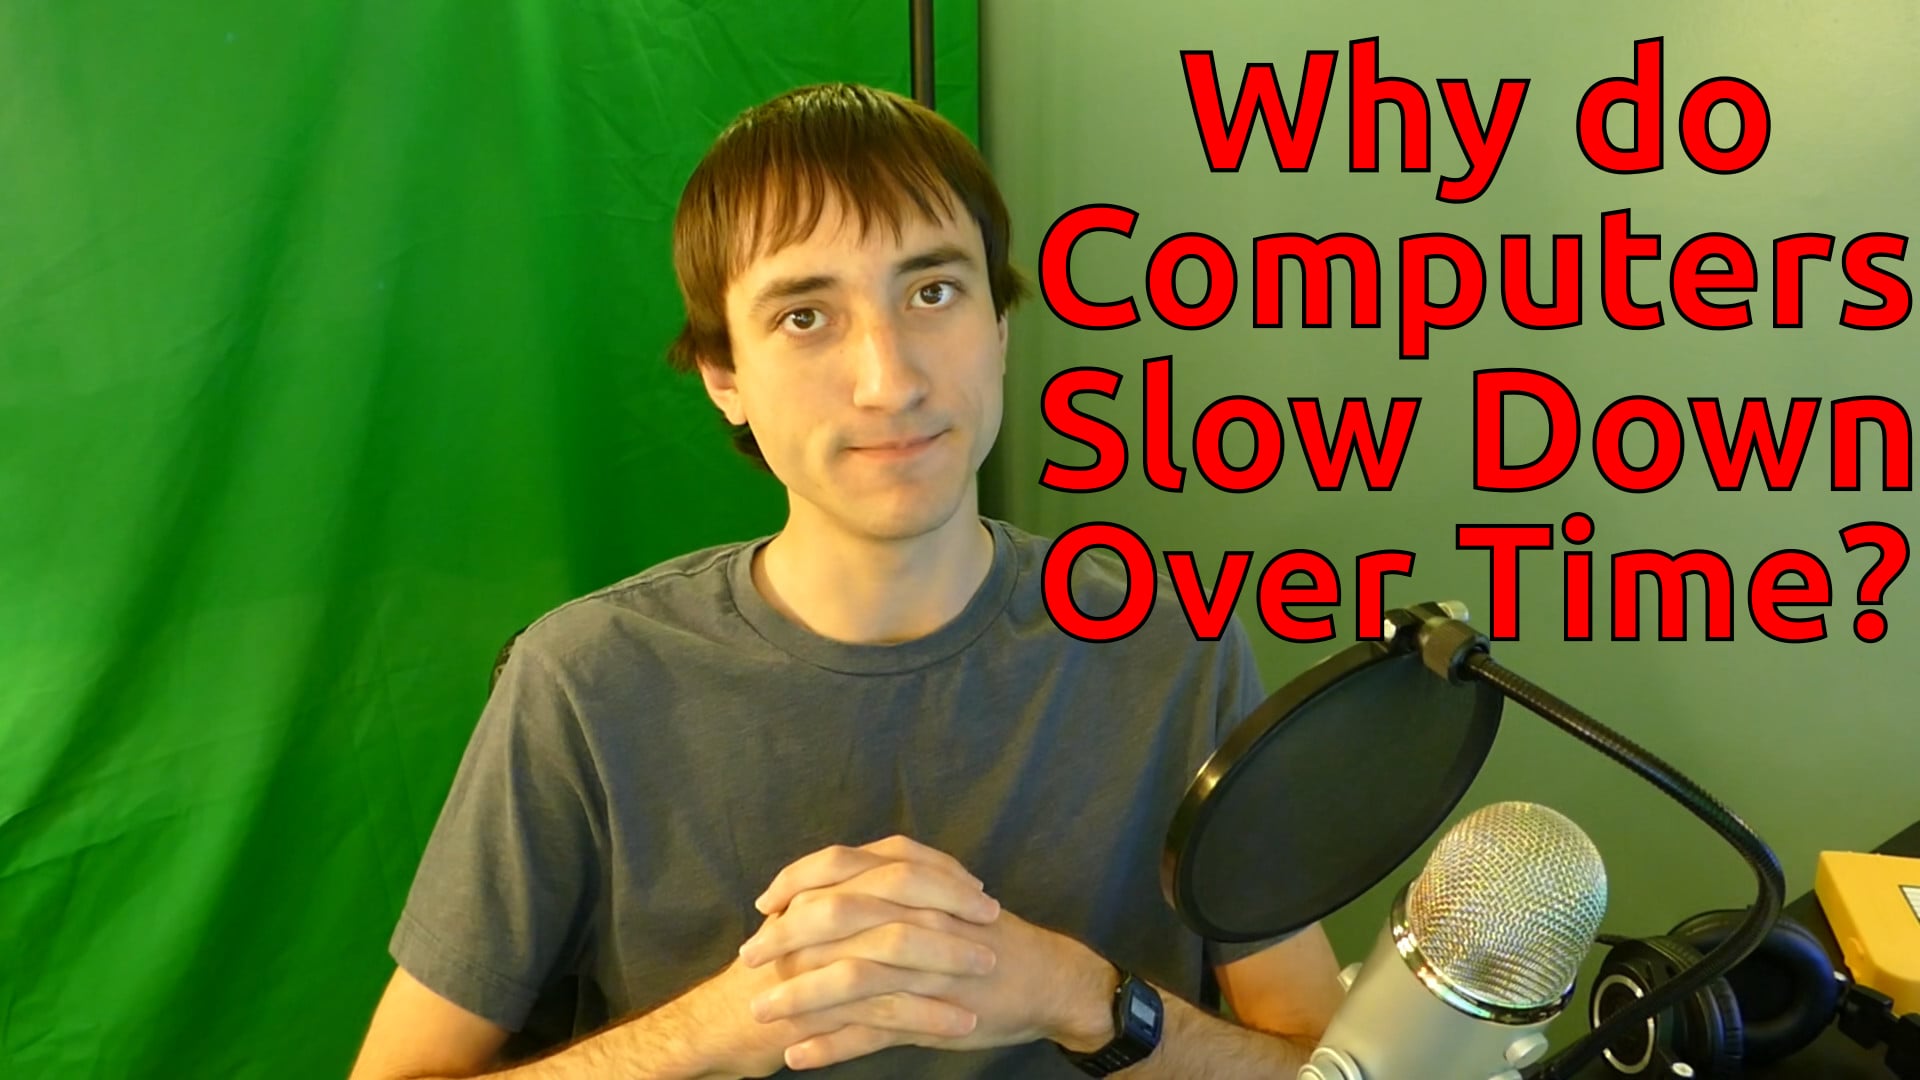 Why do Computers Slow Down?